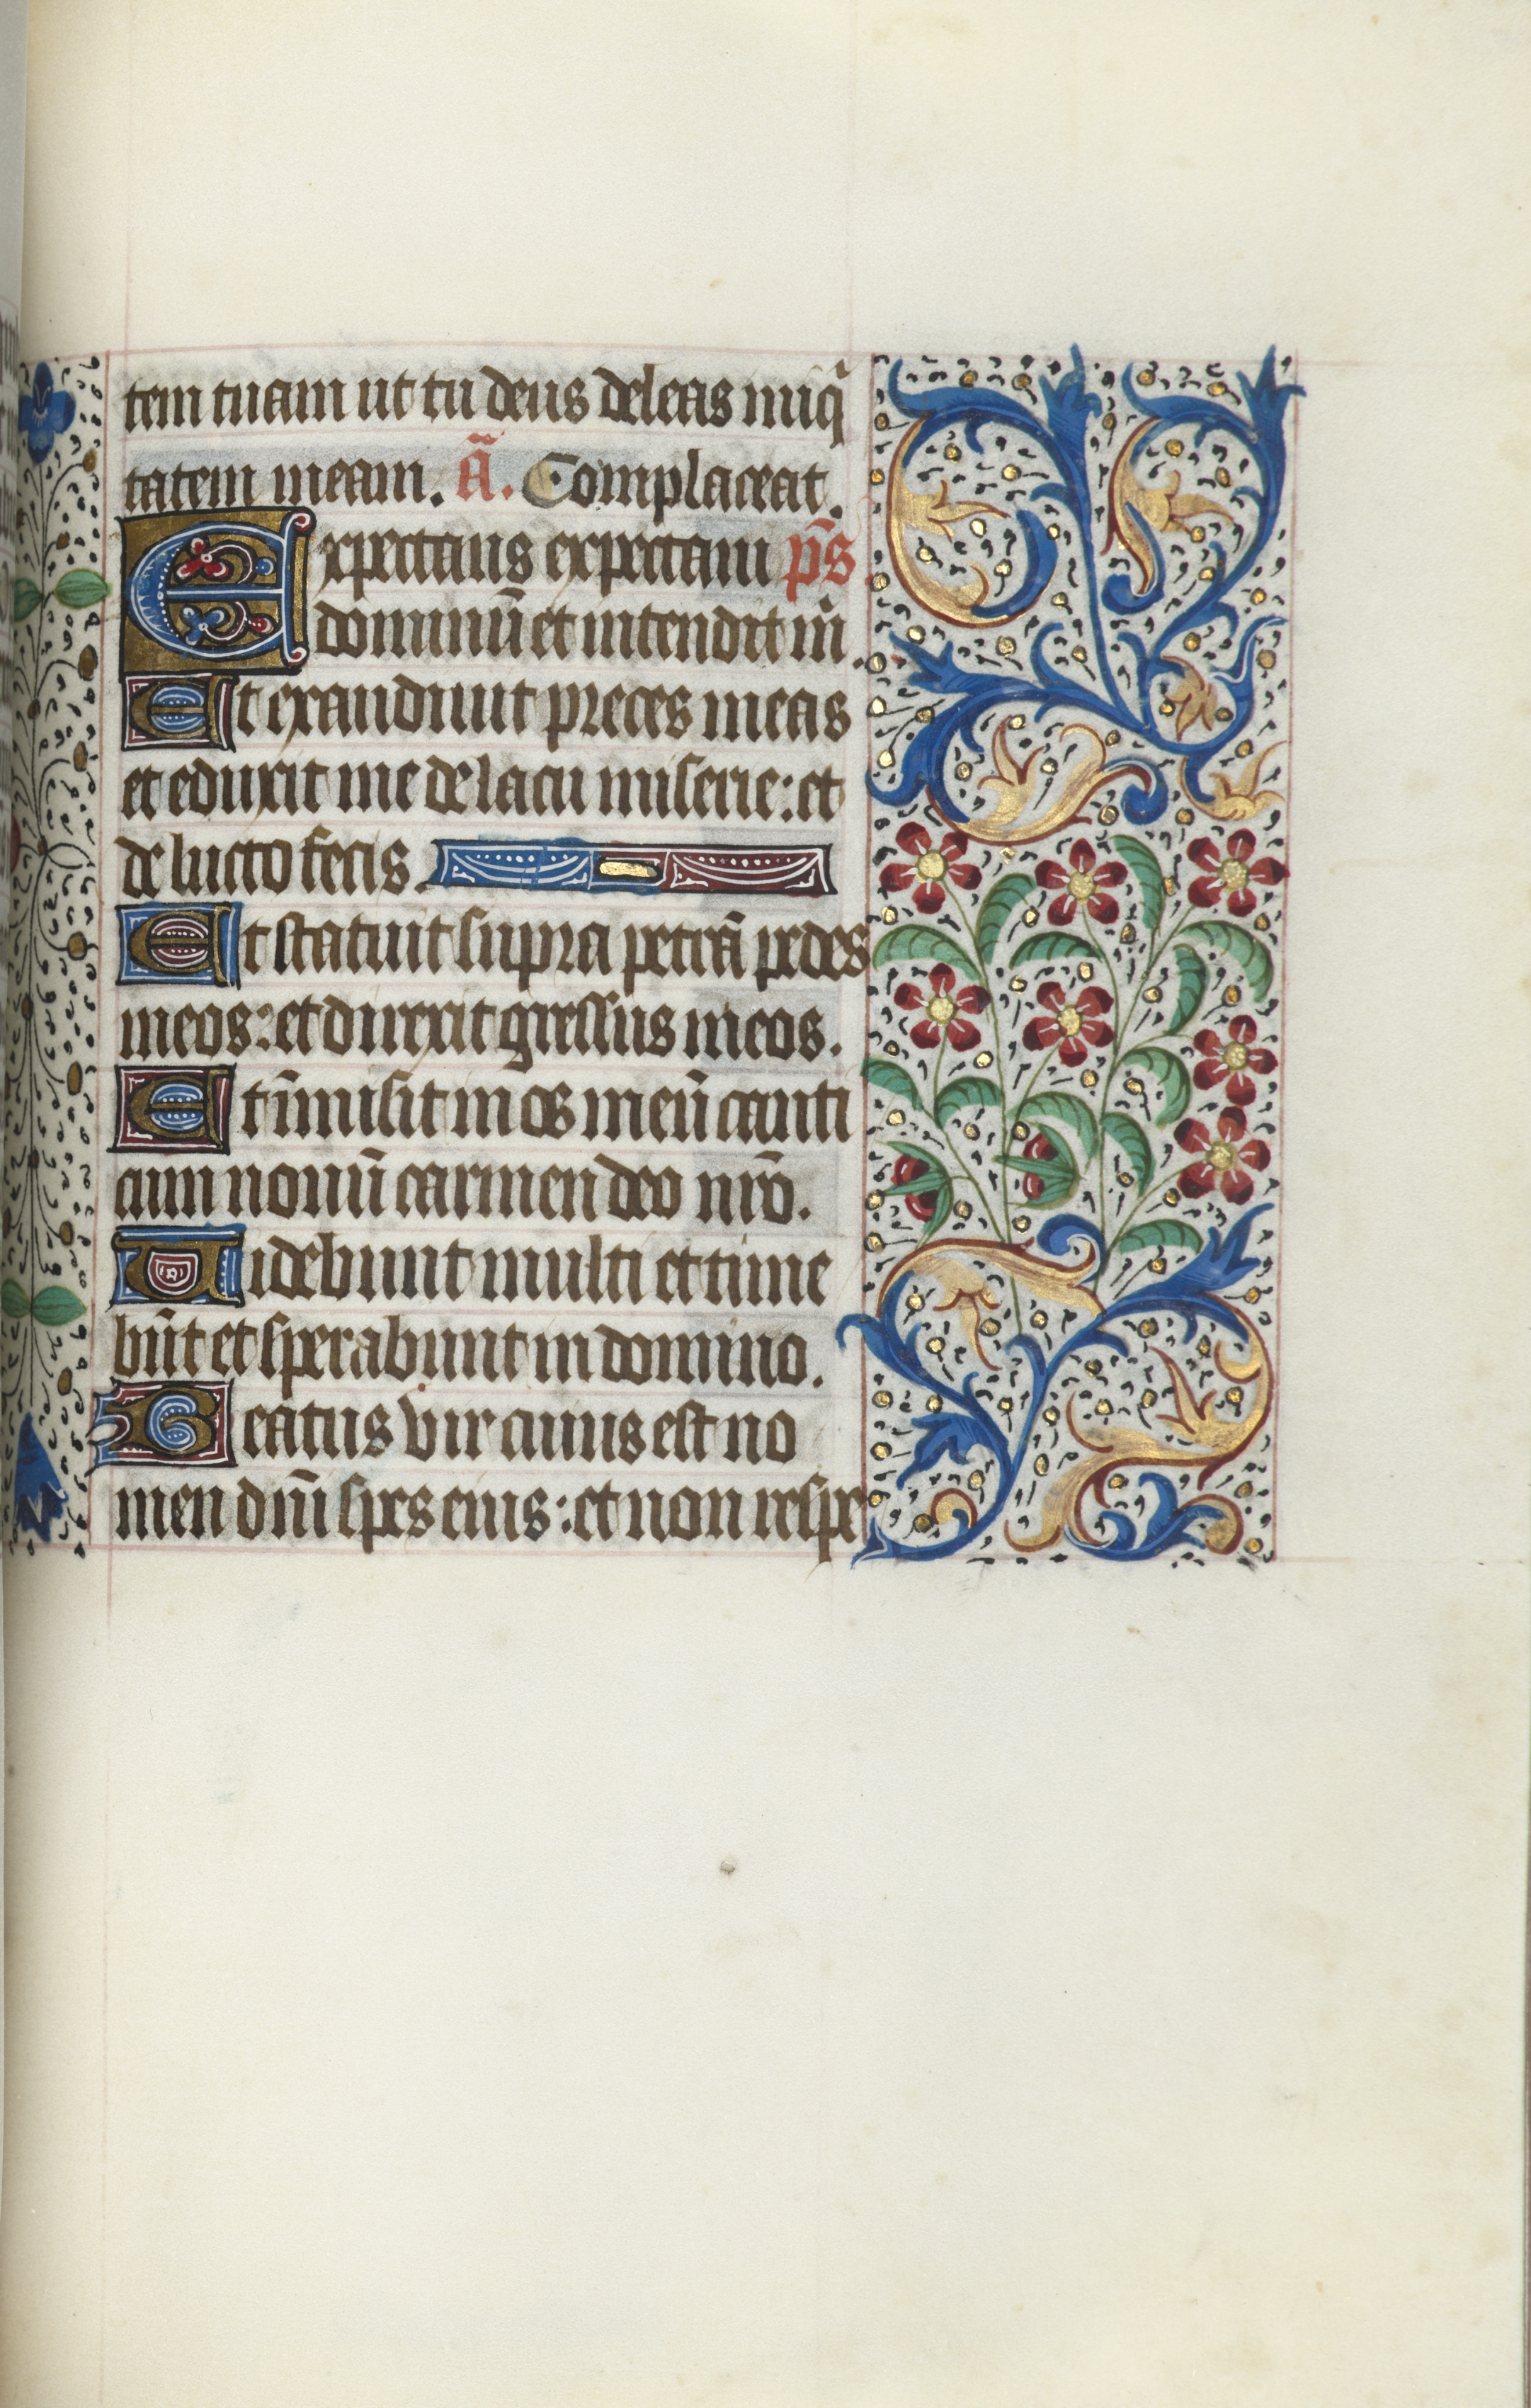 Book of Hours (Use of Rouen): fol. 125r